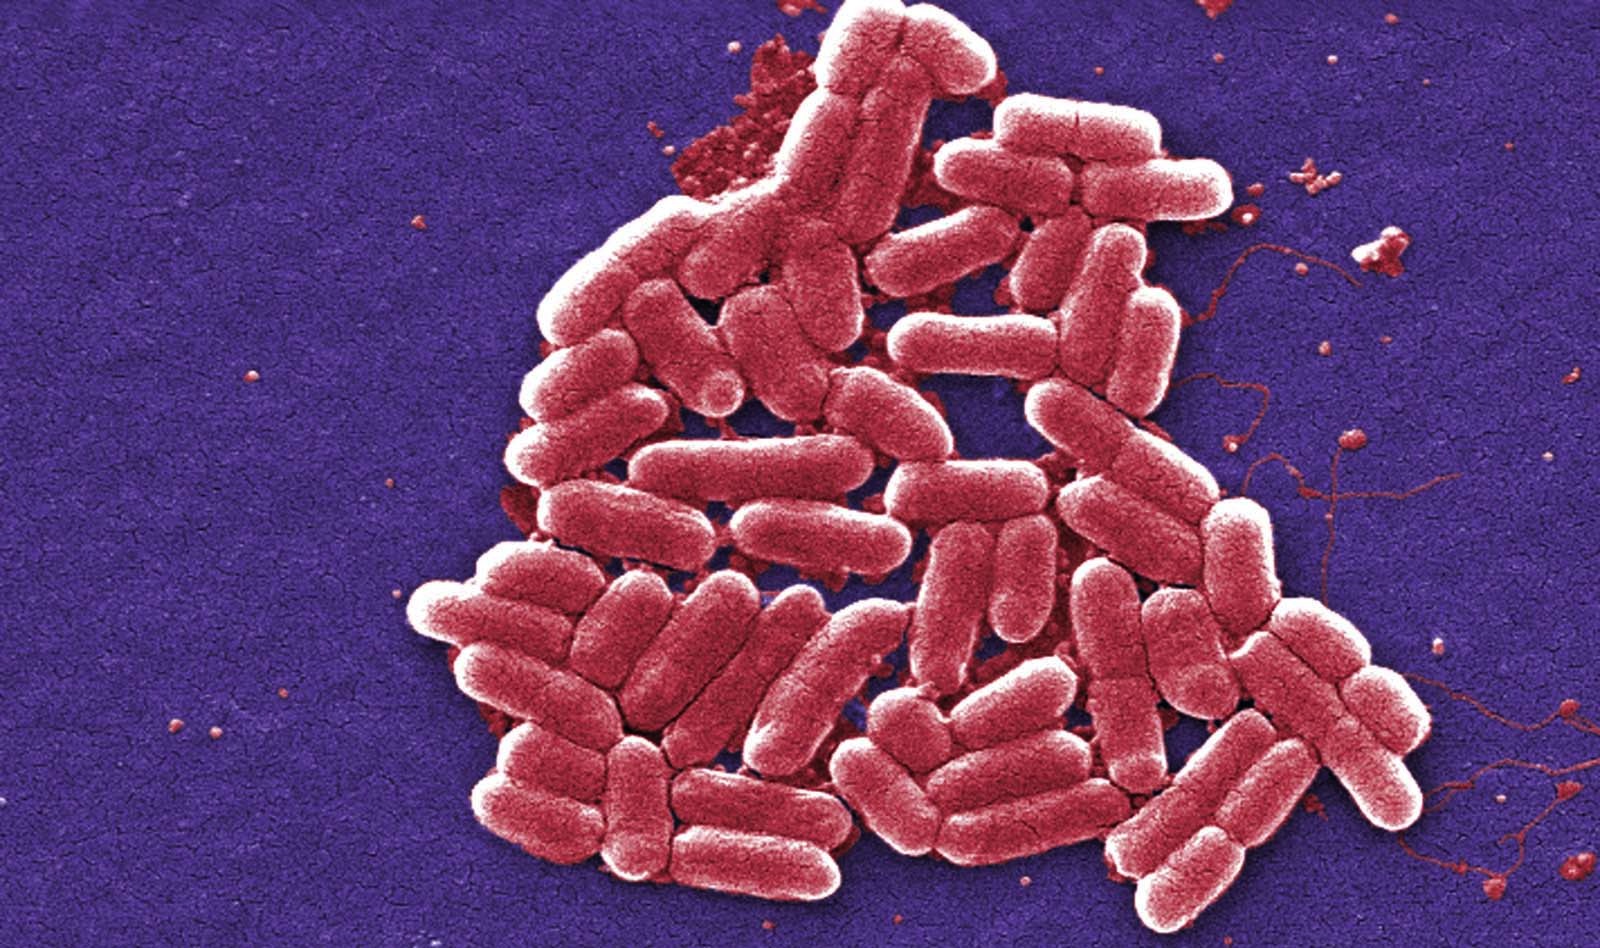 Your DNA Could Make You Resistant To Certain Bacteria